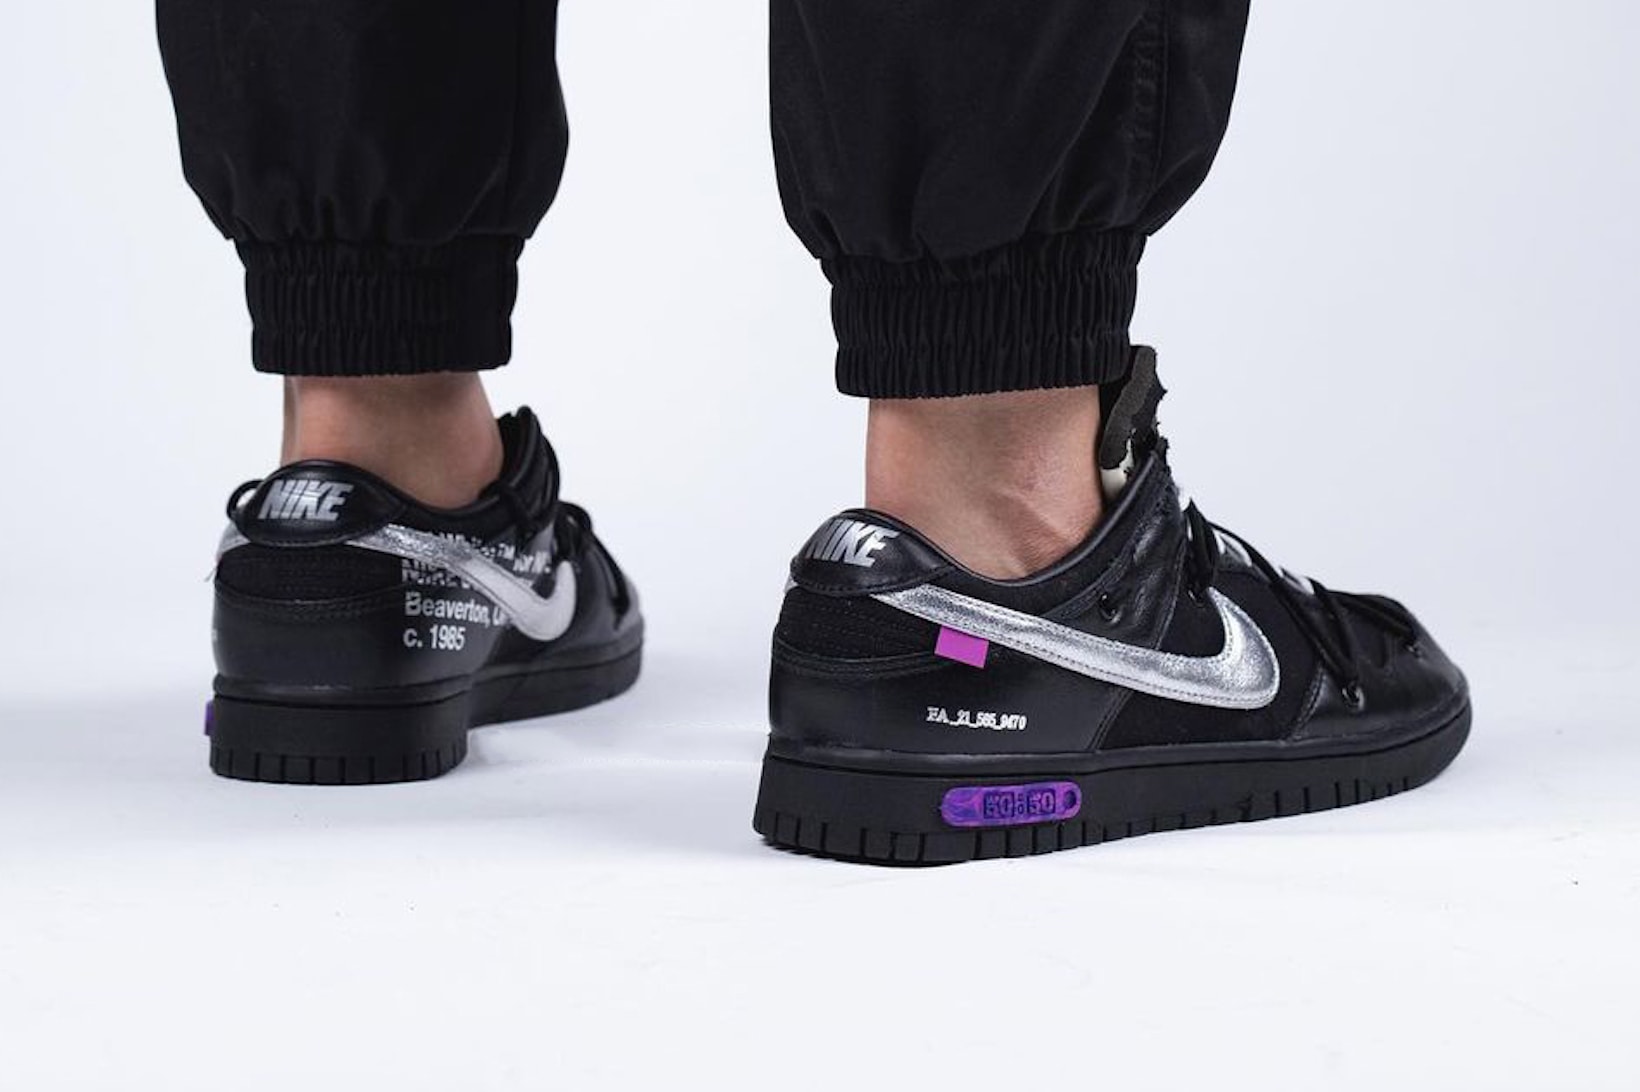 off white nike virgil abloh the 50 dunk low sneakers collaboration black silver colorway heel